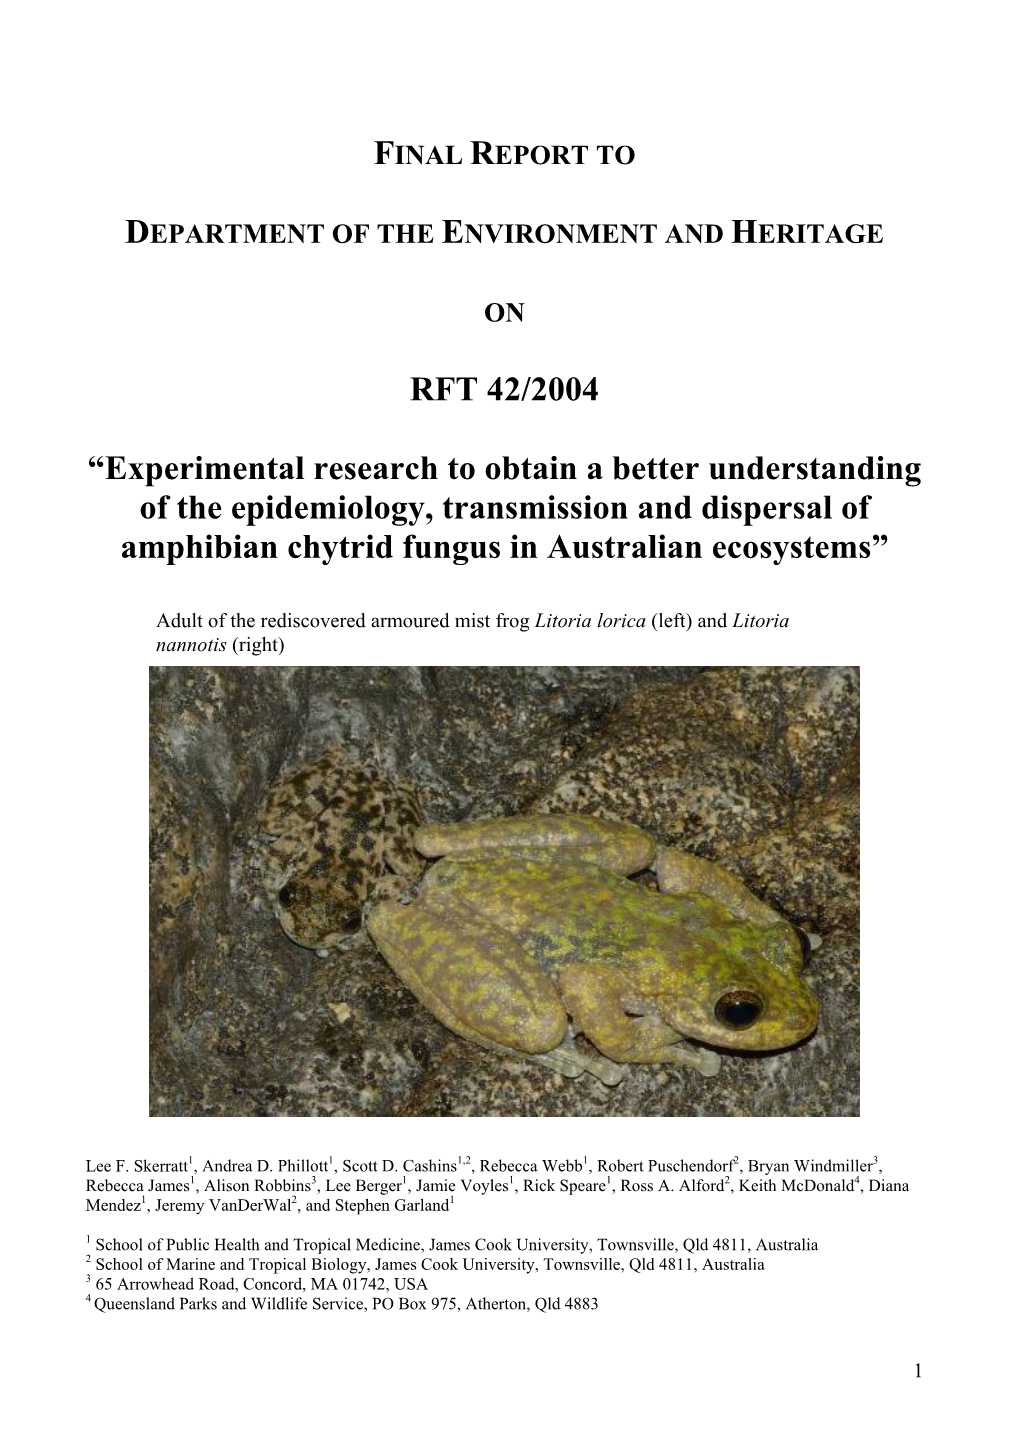 Experimental Research to Obtain a Better Understanding of the Epidemiology, Transmission and Dispersal of Amphibian Chytrid Fungus in Australian Ecosystems”